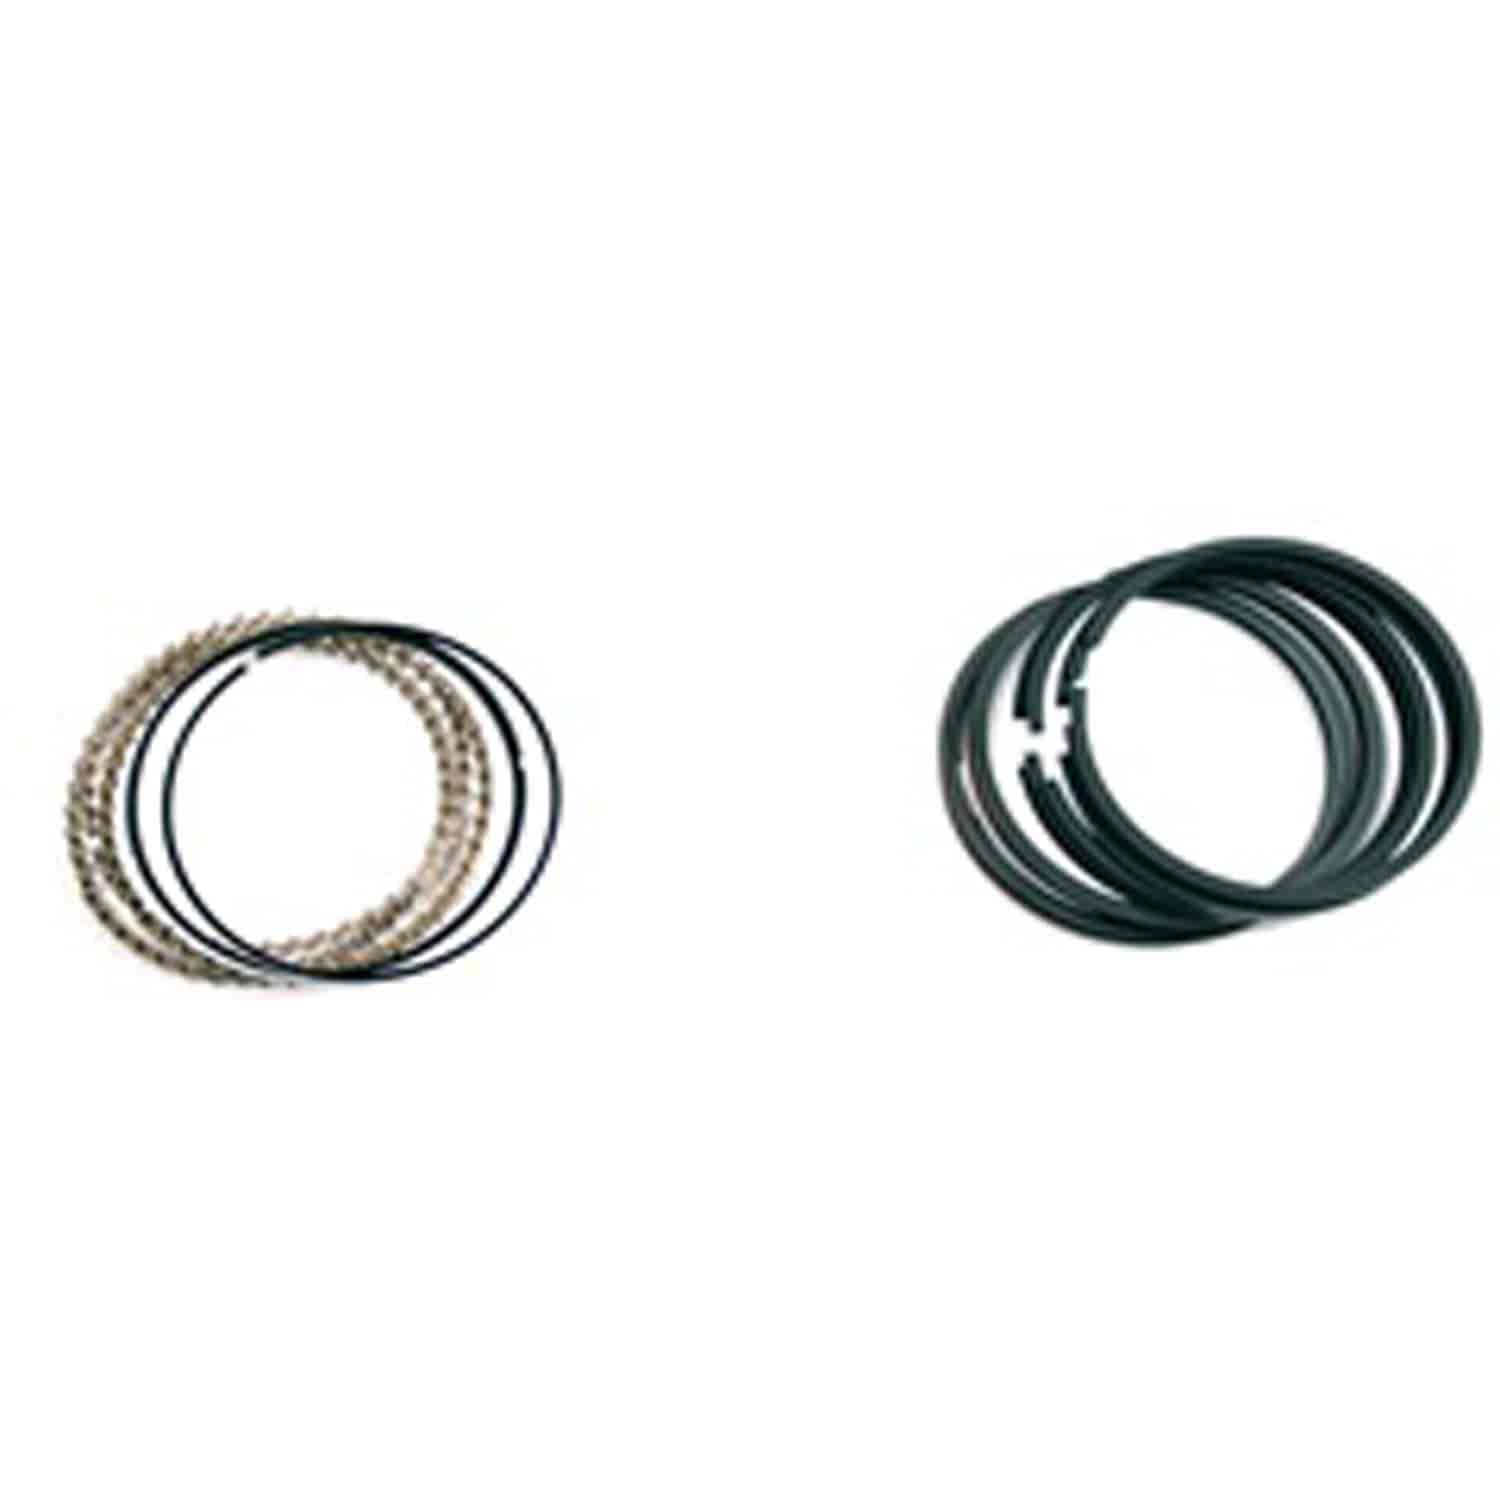 This piston ring set from Omix-ADA fits 4.7L engines that have been bored 0.50mm oversize. Fits 99-0